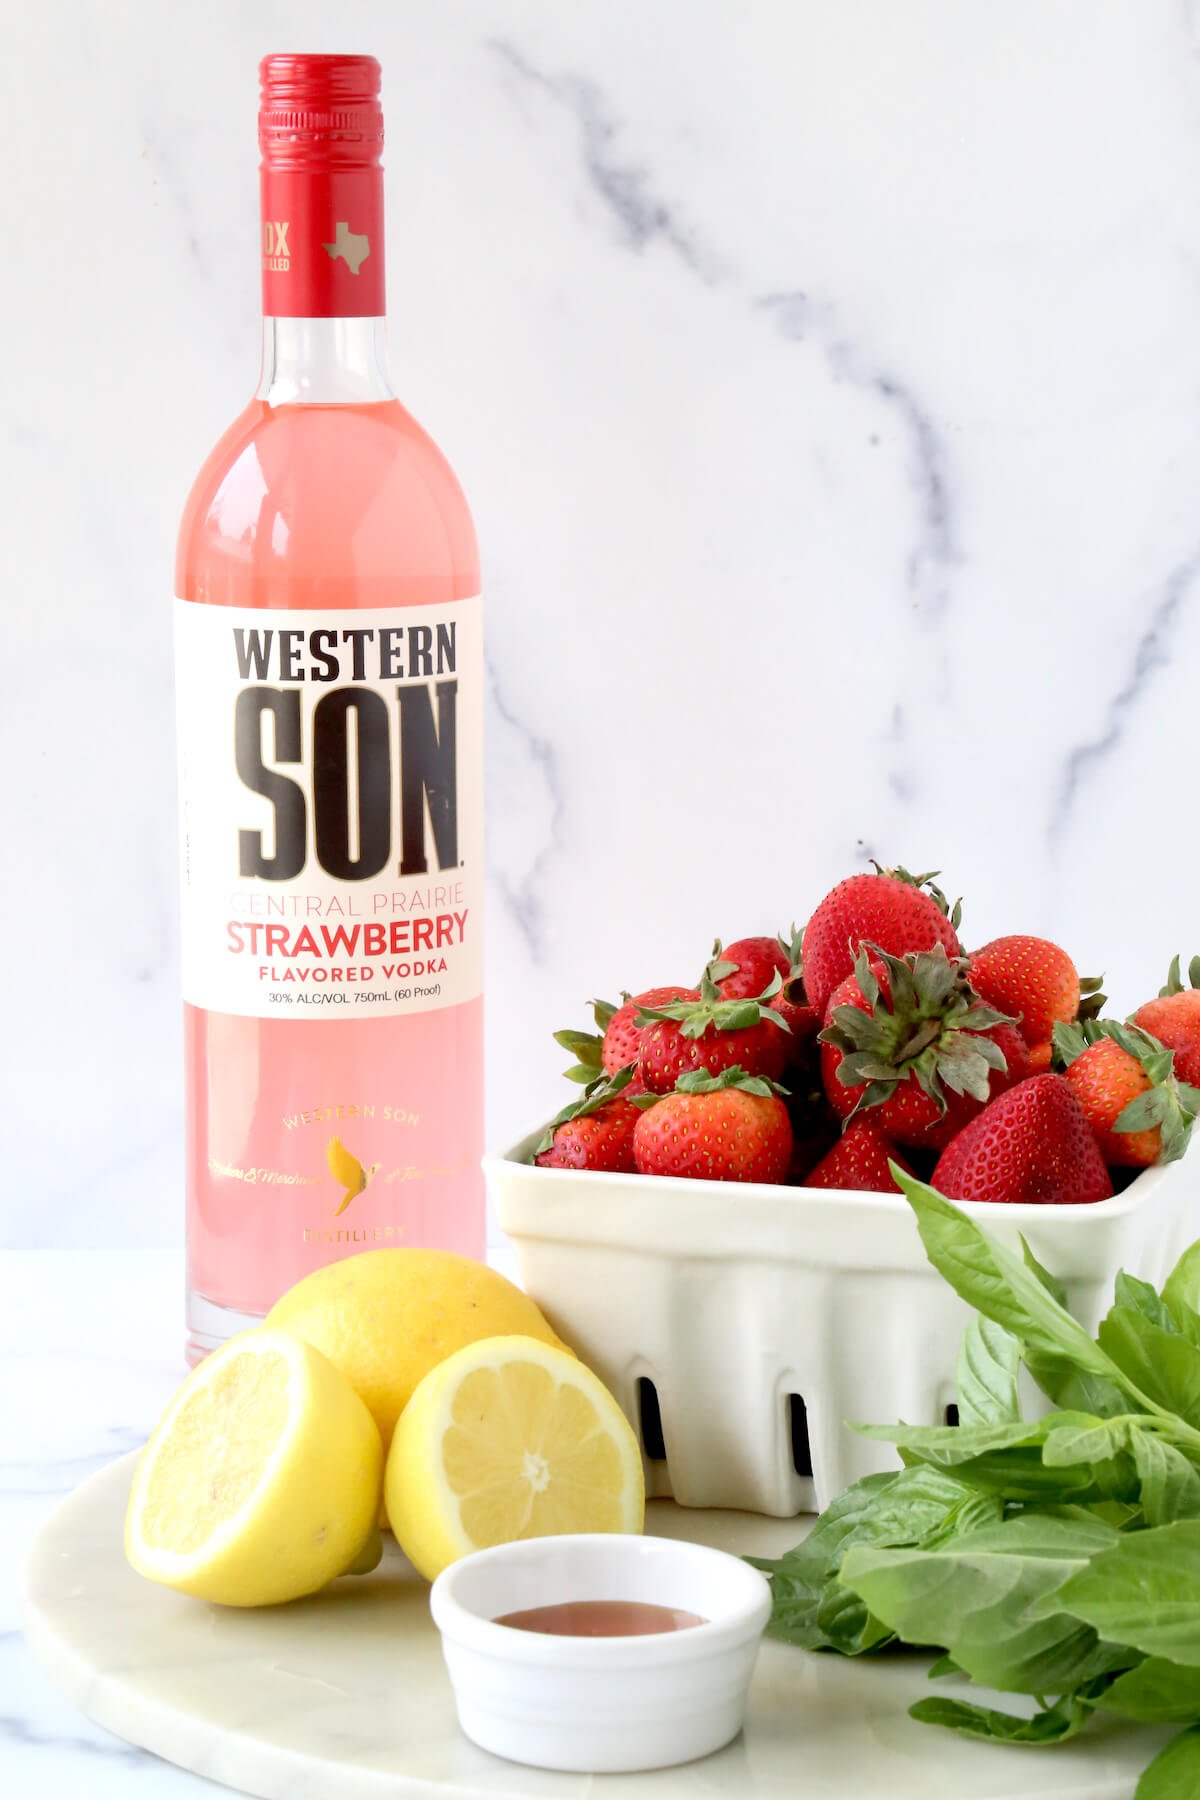 A tall bottle filled with a pink liquid next to sliced lemons and a bowl of fresh strawberries.